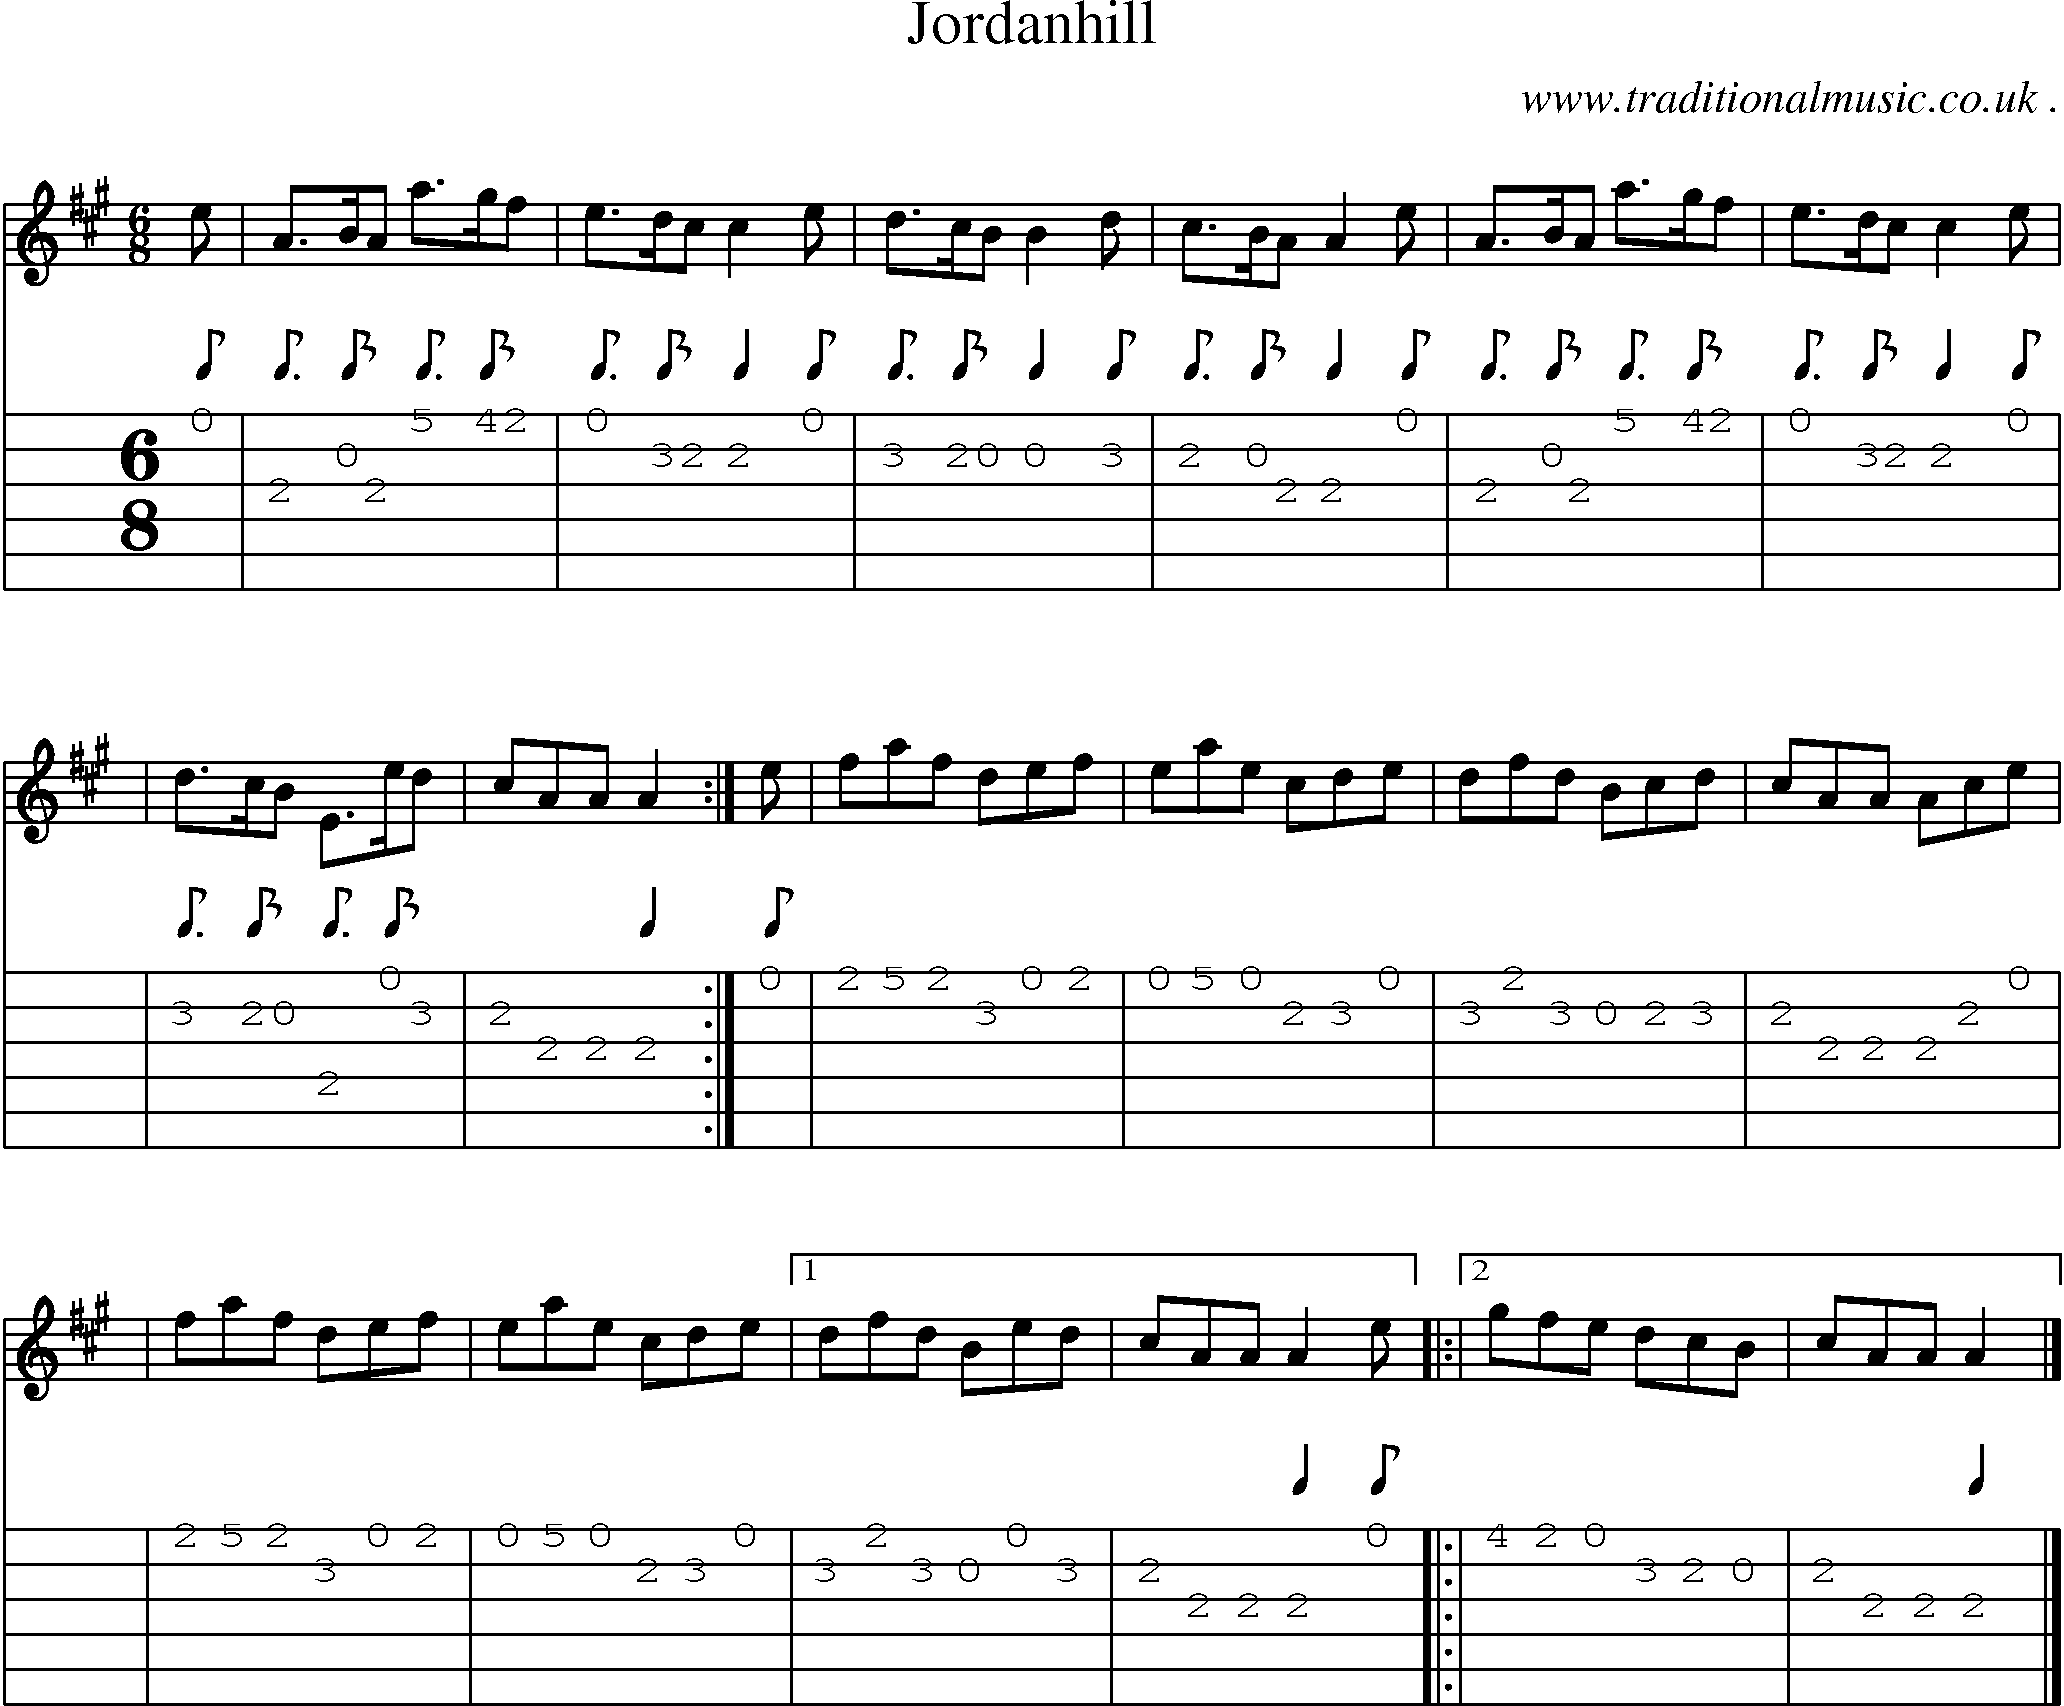 Sheet-music  score, Chords and Guitar Tabs for Jordanhill